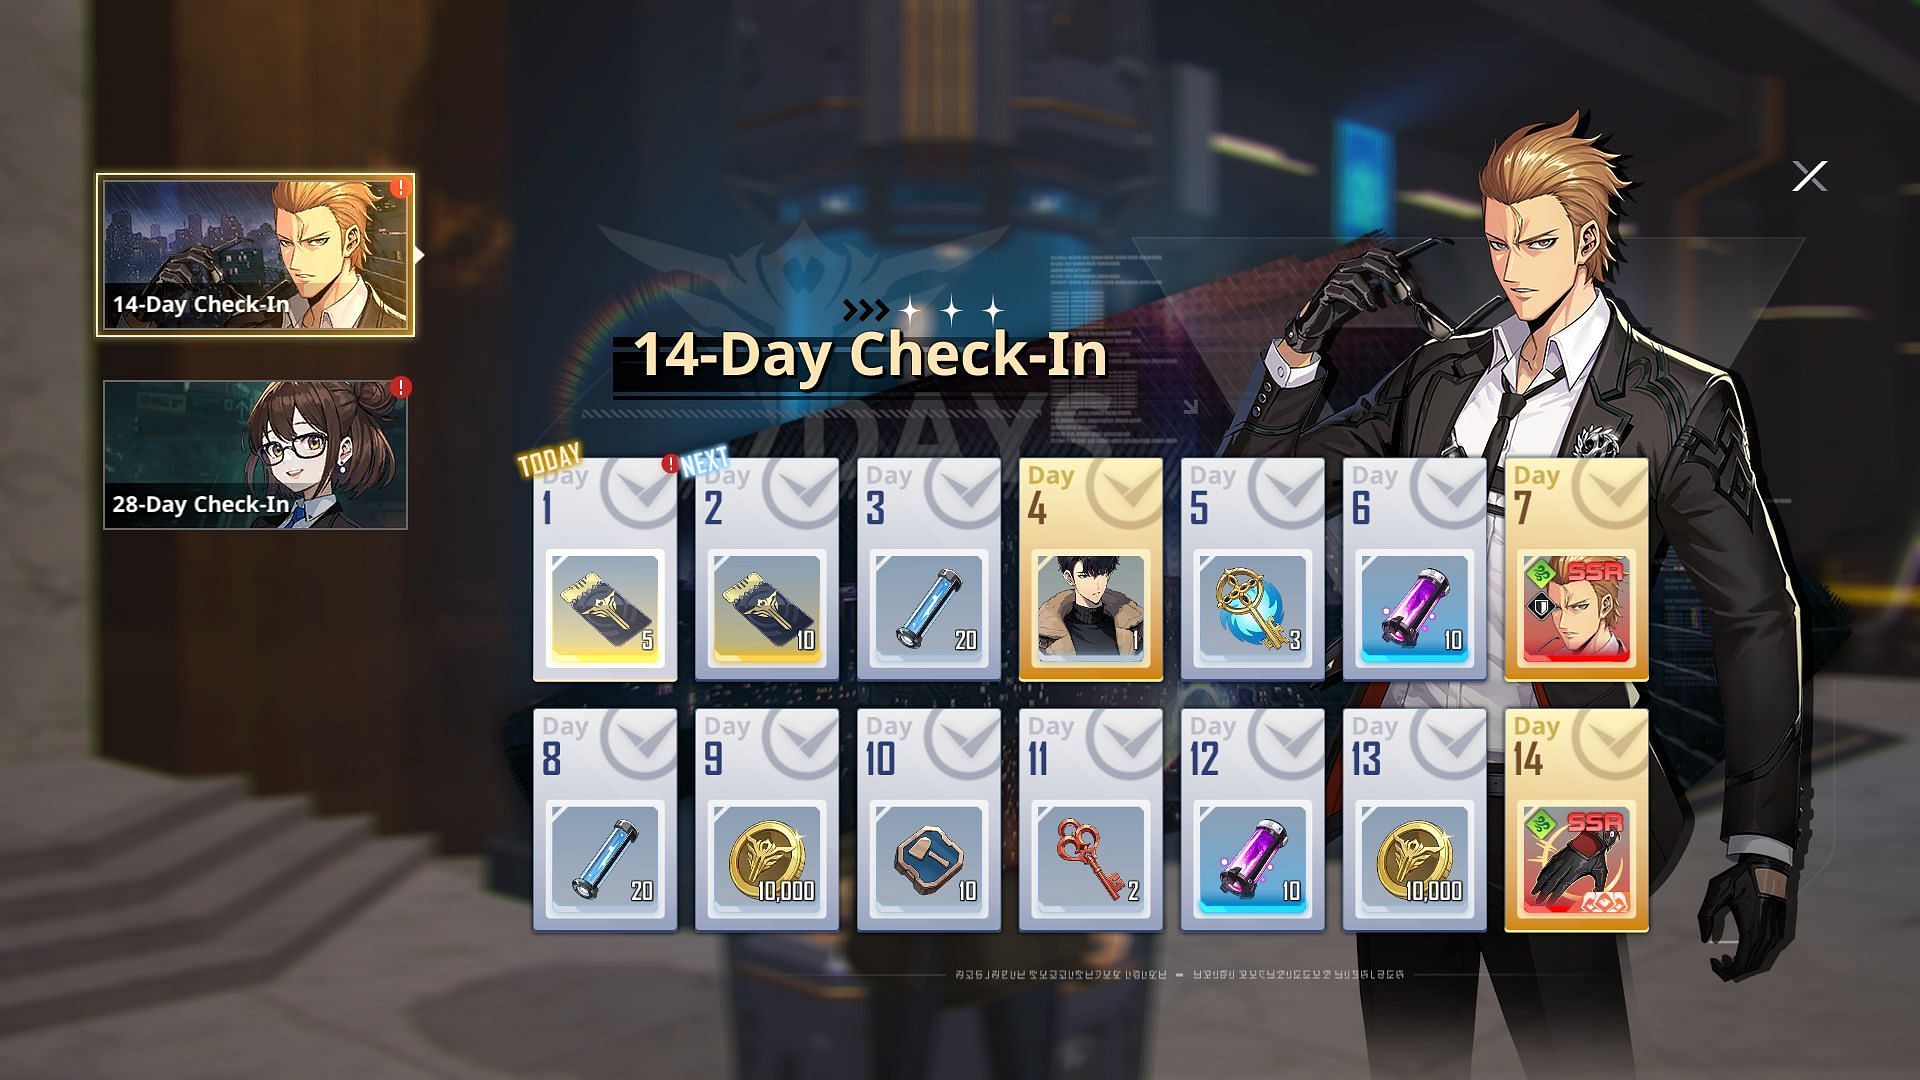 The launch rewards are actually nice (Image via Netmarble)